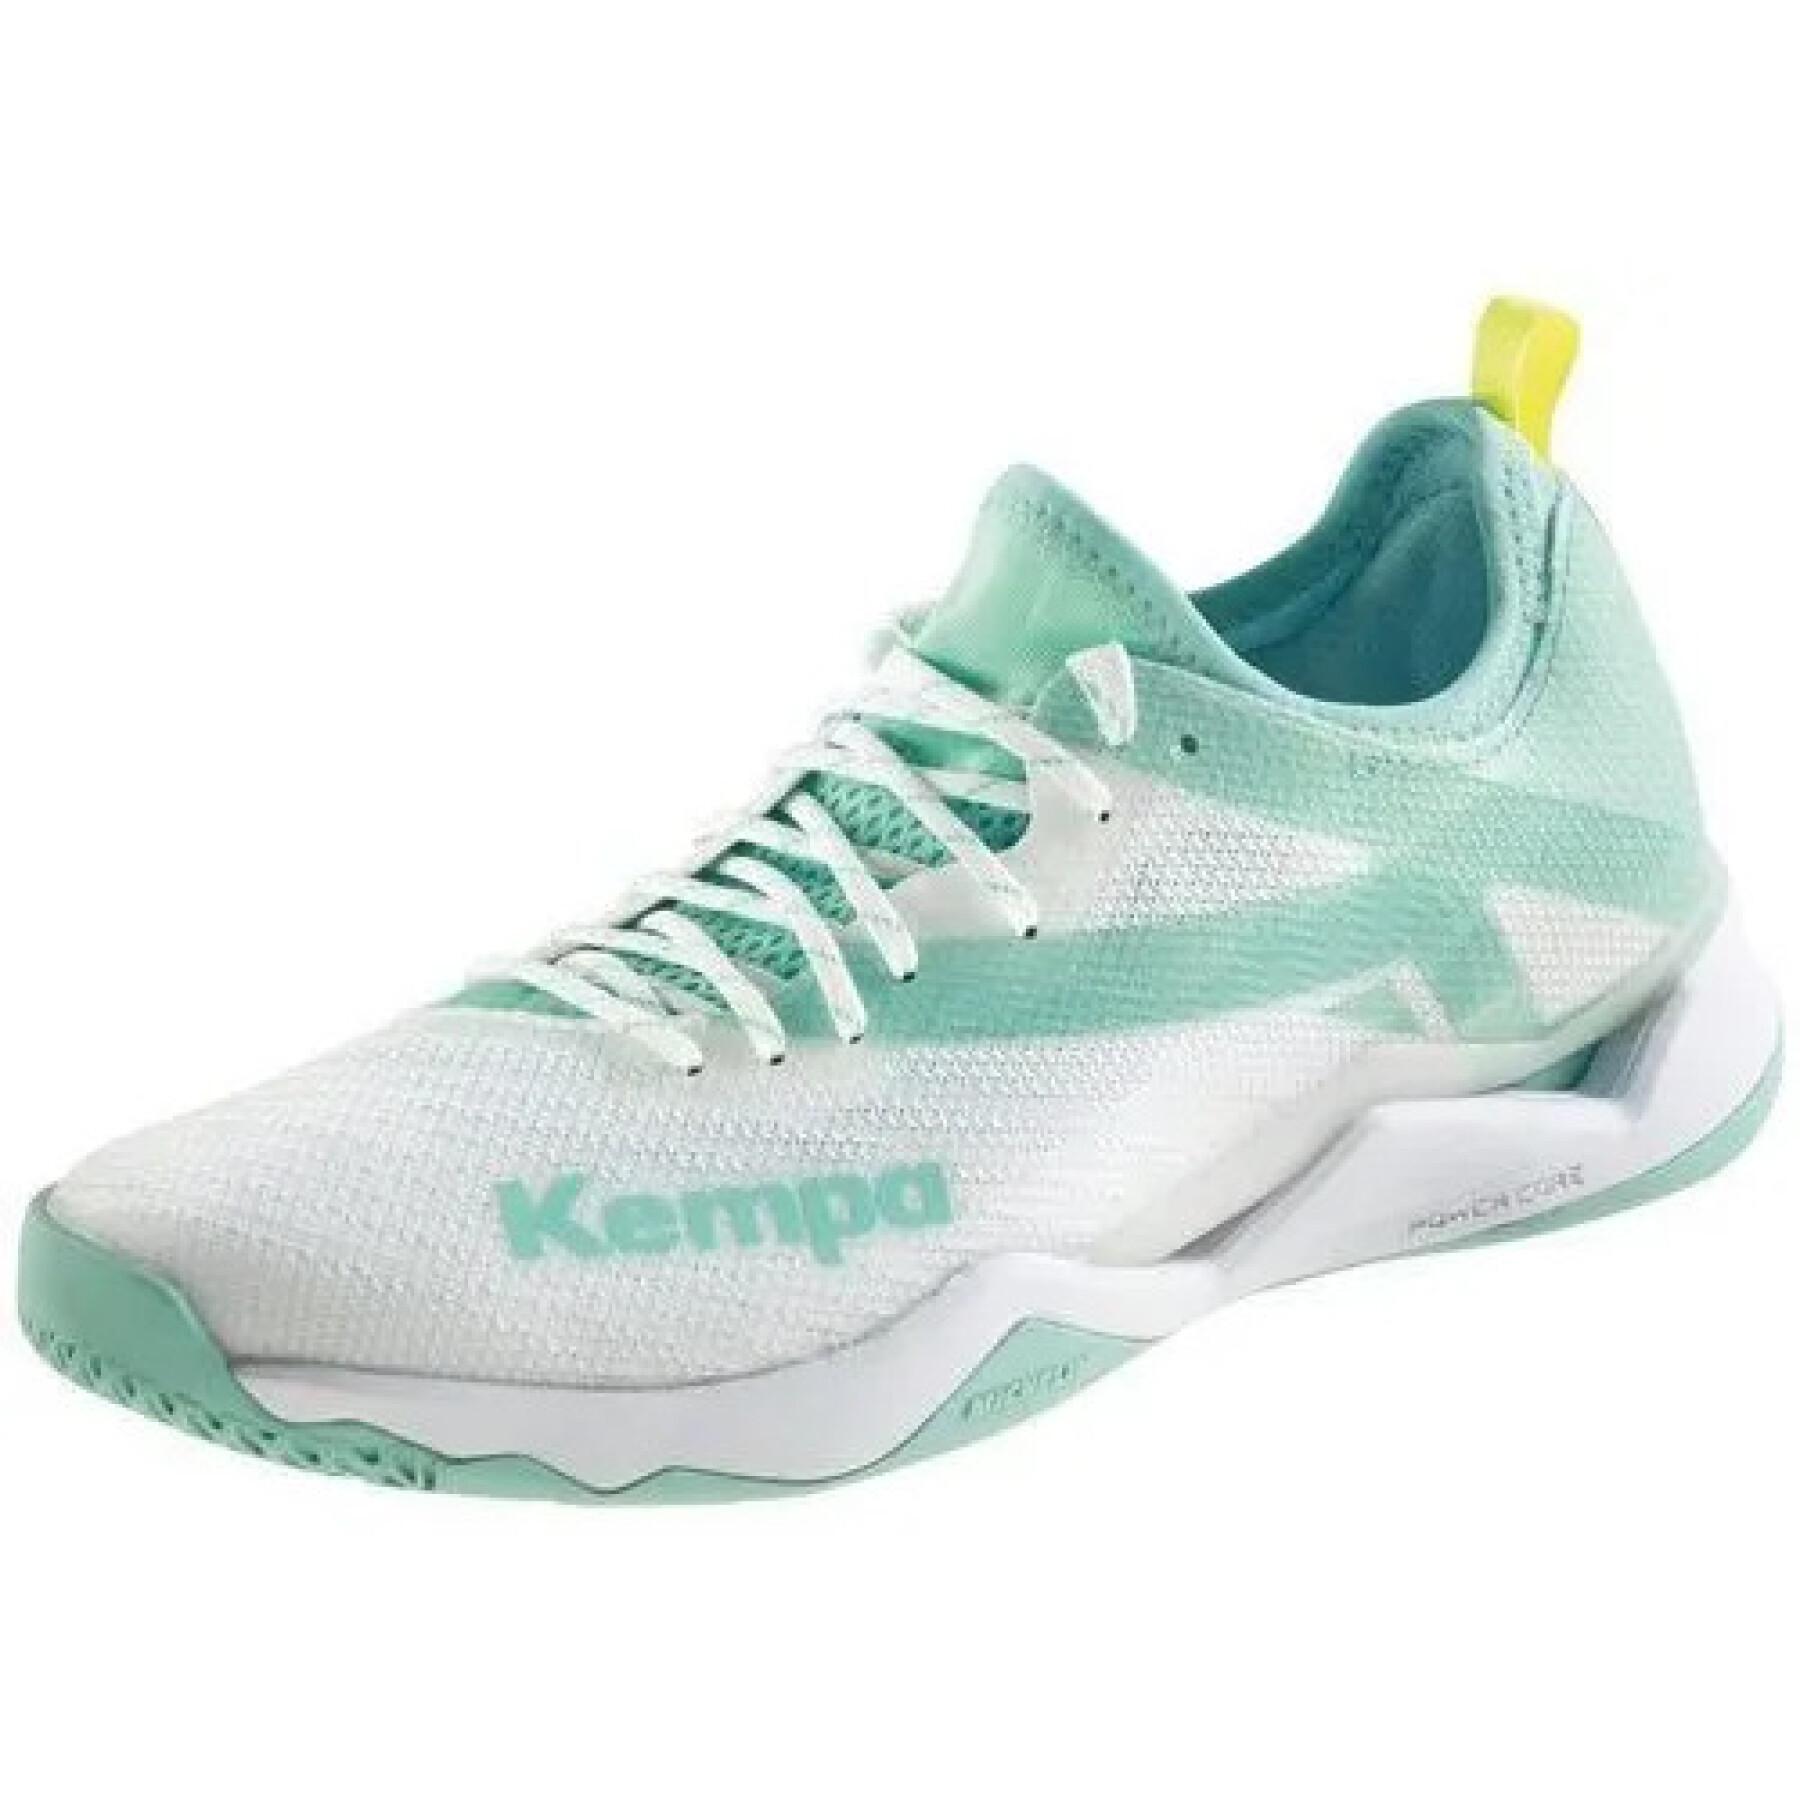 Chaussures femme Kempa Wing Lite 2.0